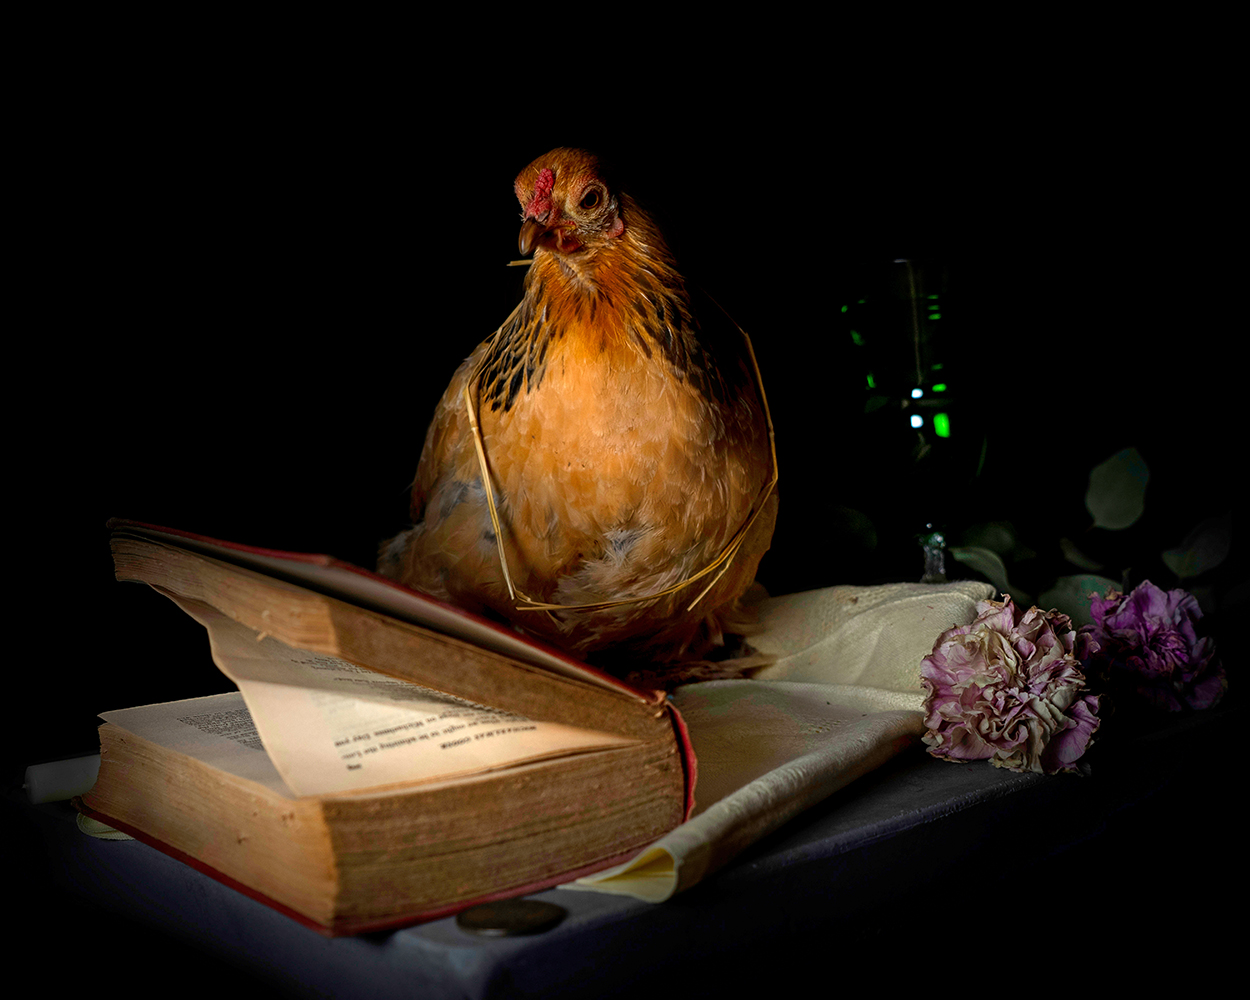 chicken on book with flowers